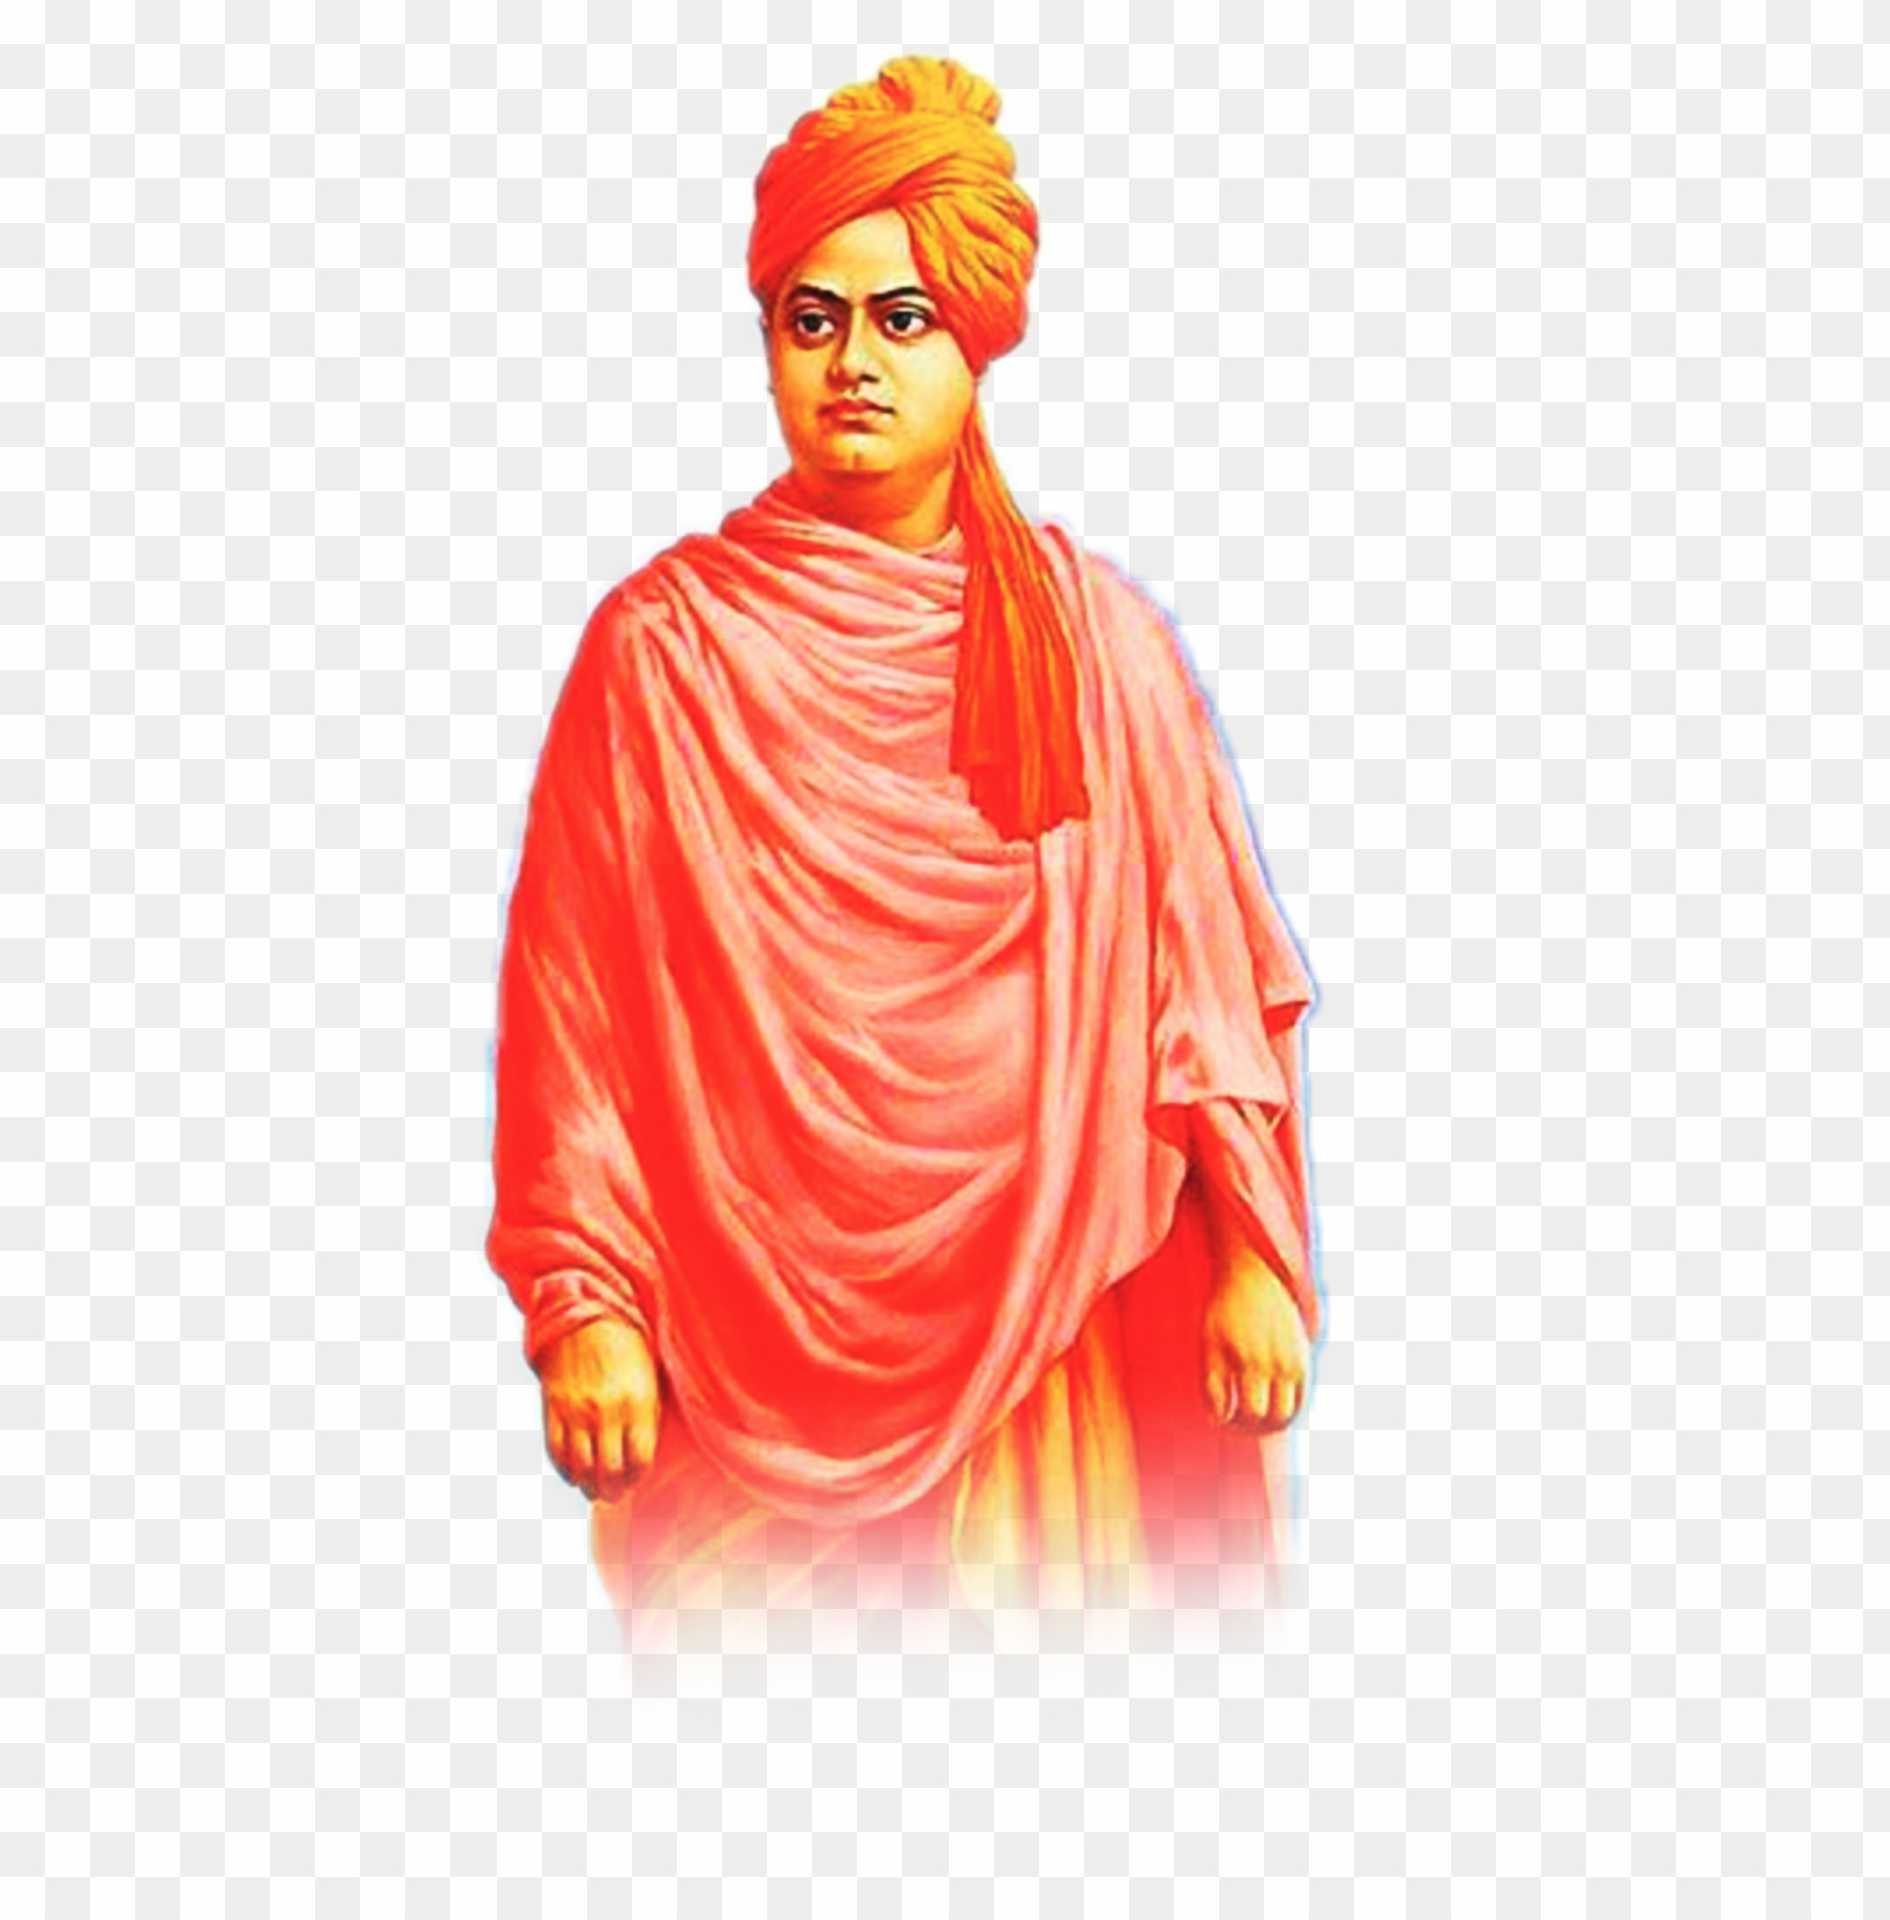 Swami Vivekanand full hd png images 